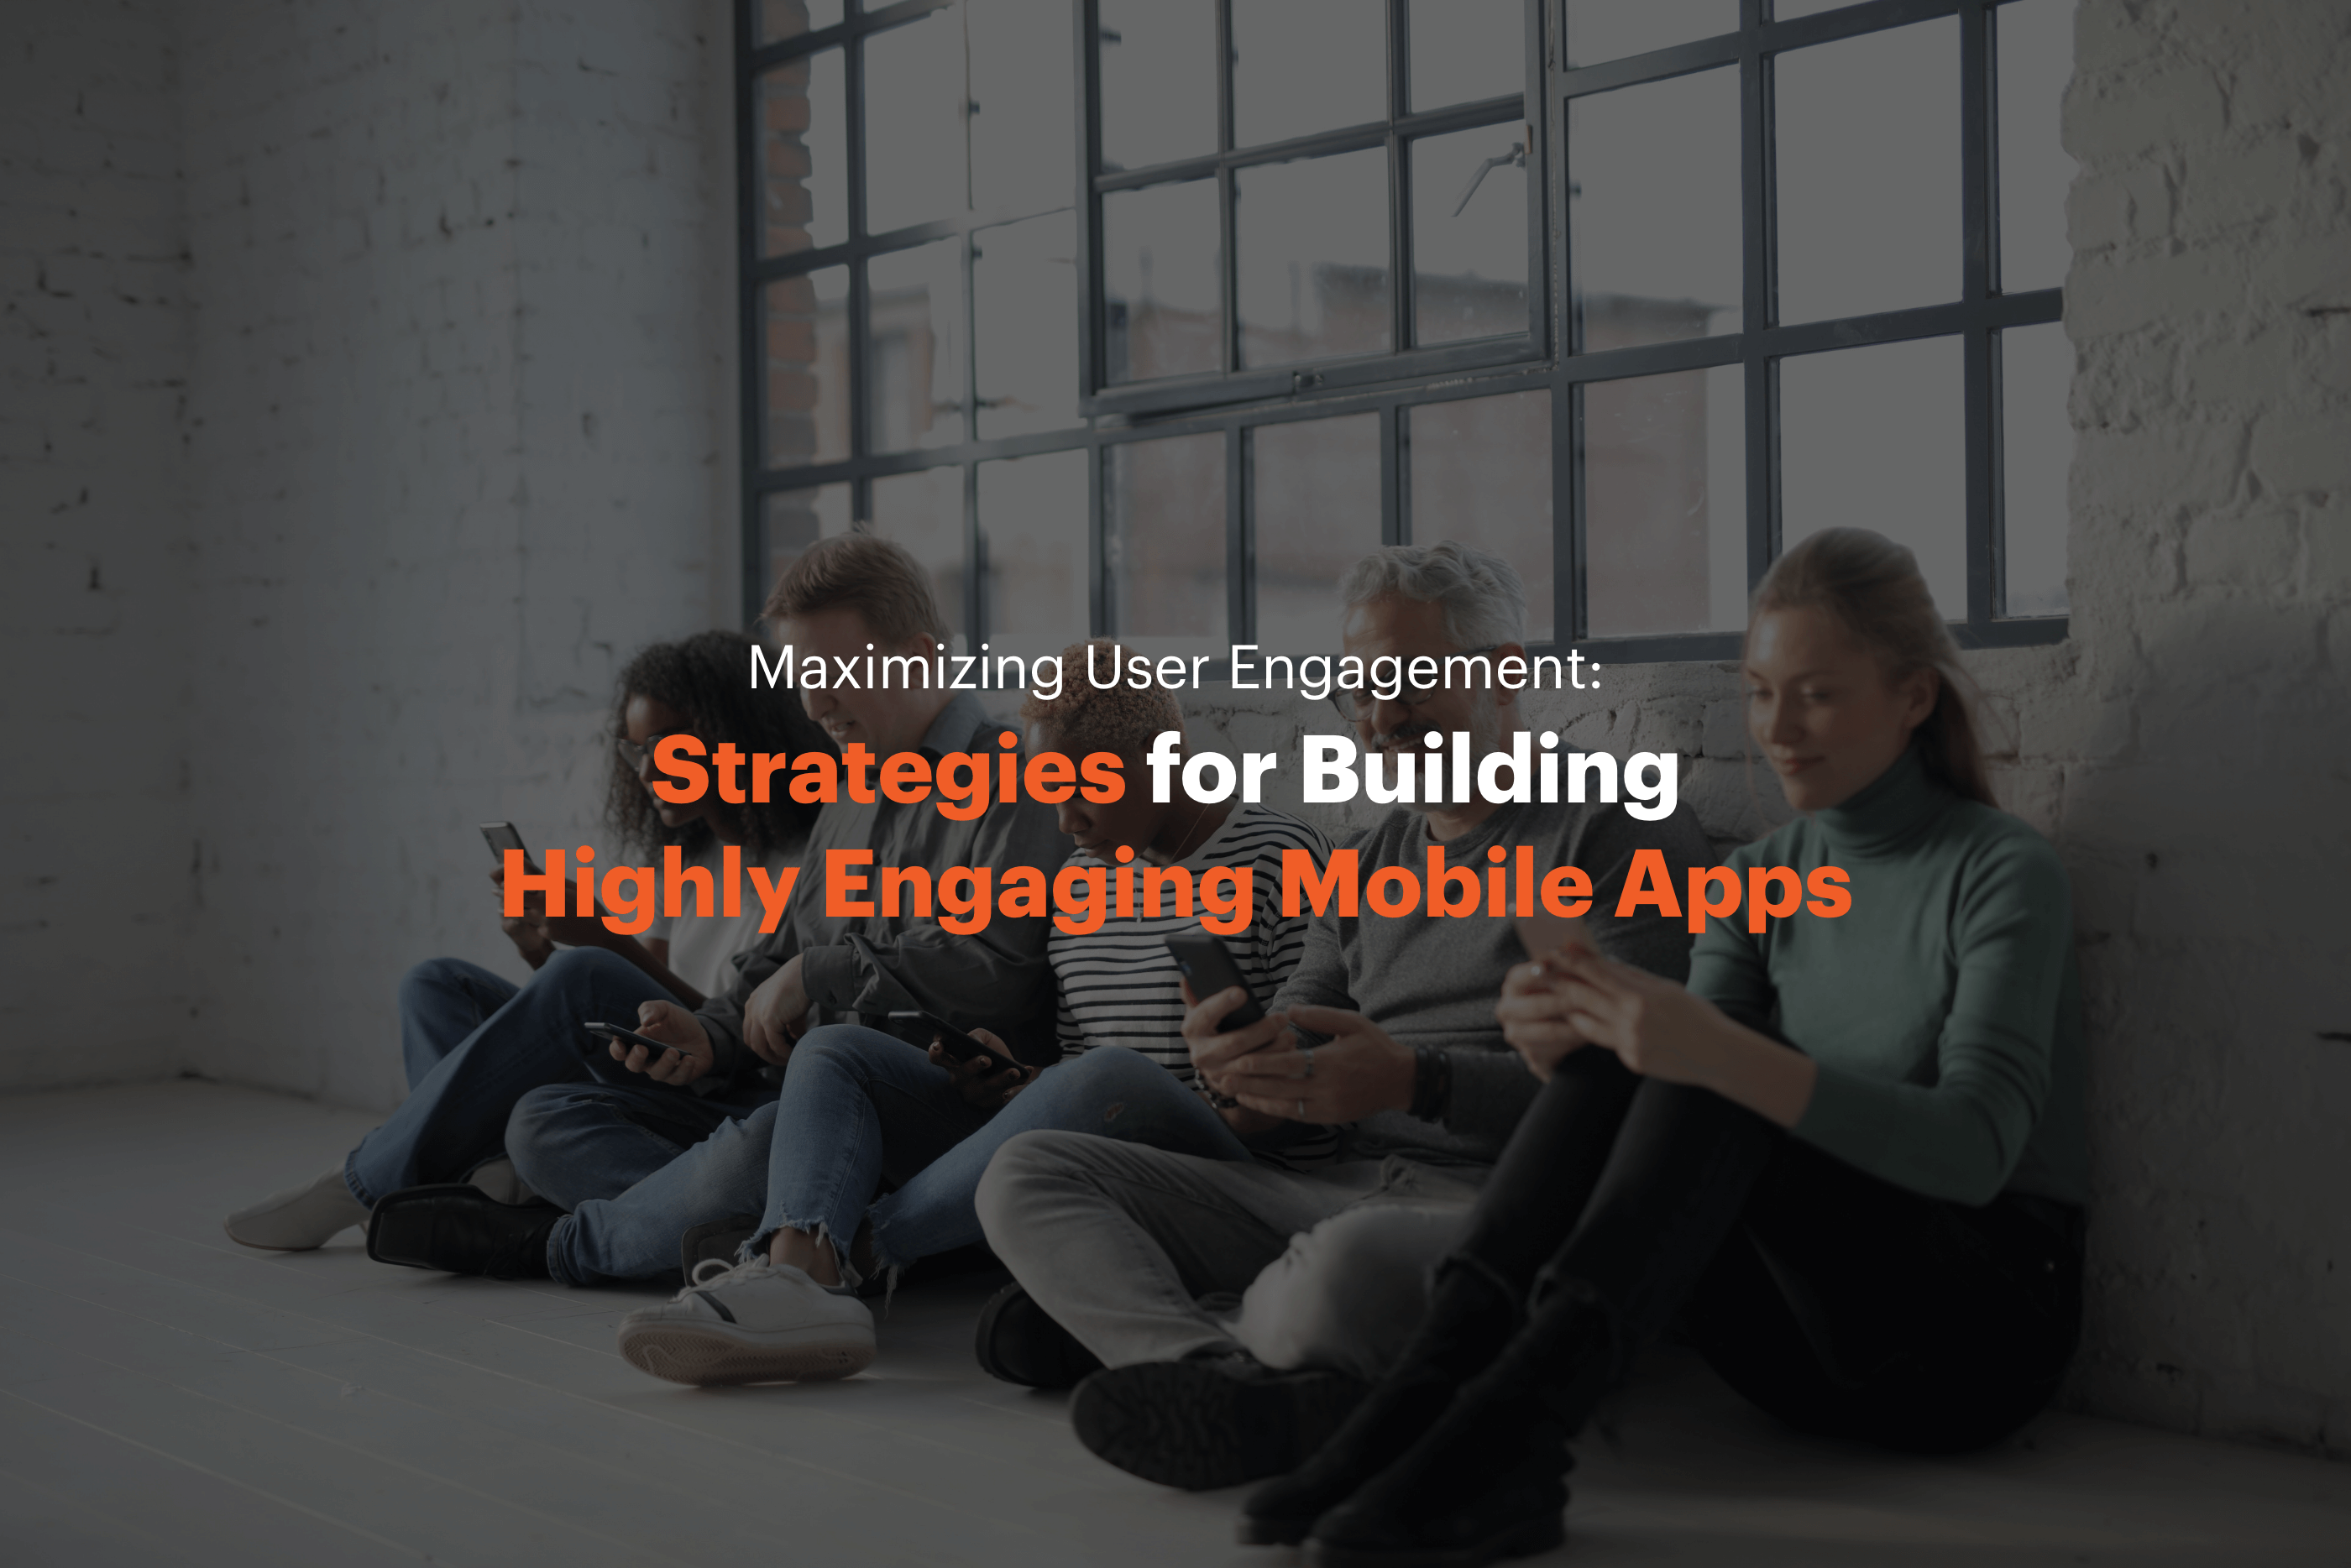 Maximizing User Engagement: Strategies for Building Highly Engaging Mobile Apps